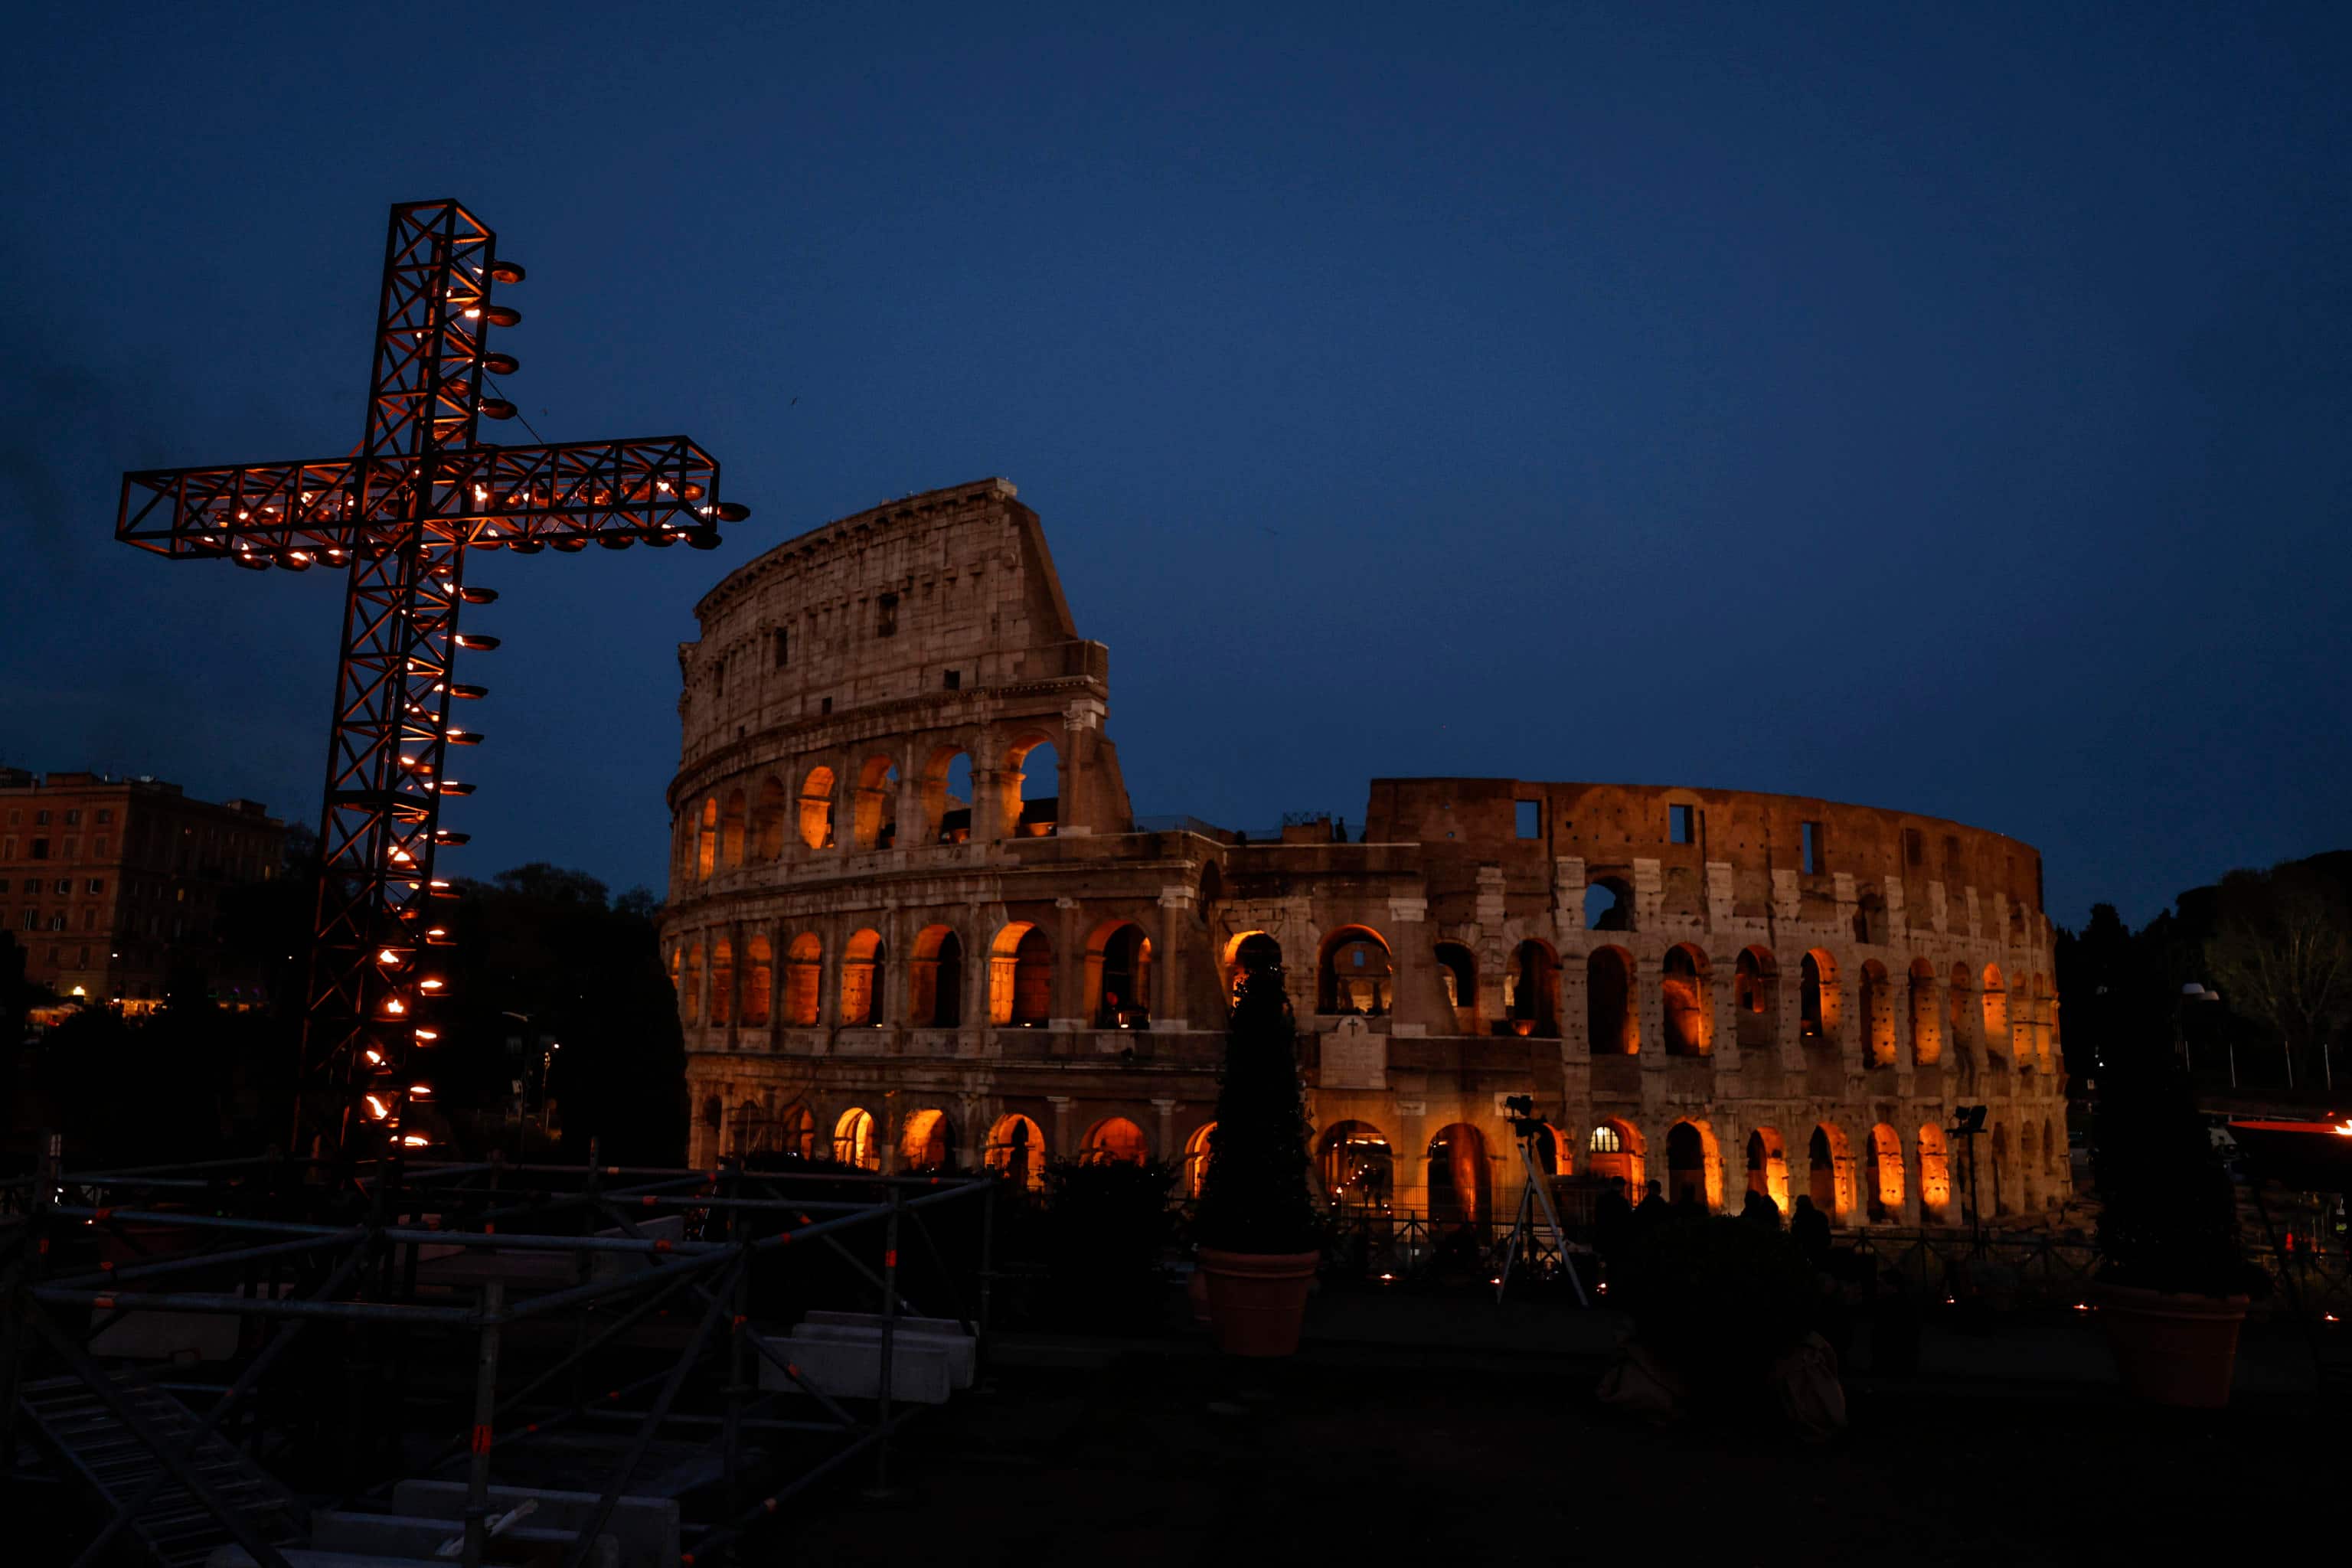 A moment of the Via Crucis - Way of the Cross torchlight procession on Good Friday in front of Colosseum in Rome, Italy, 07 April 2023.
ANSA/FABIO FRUSTACI